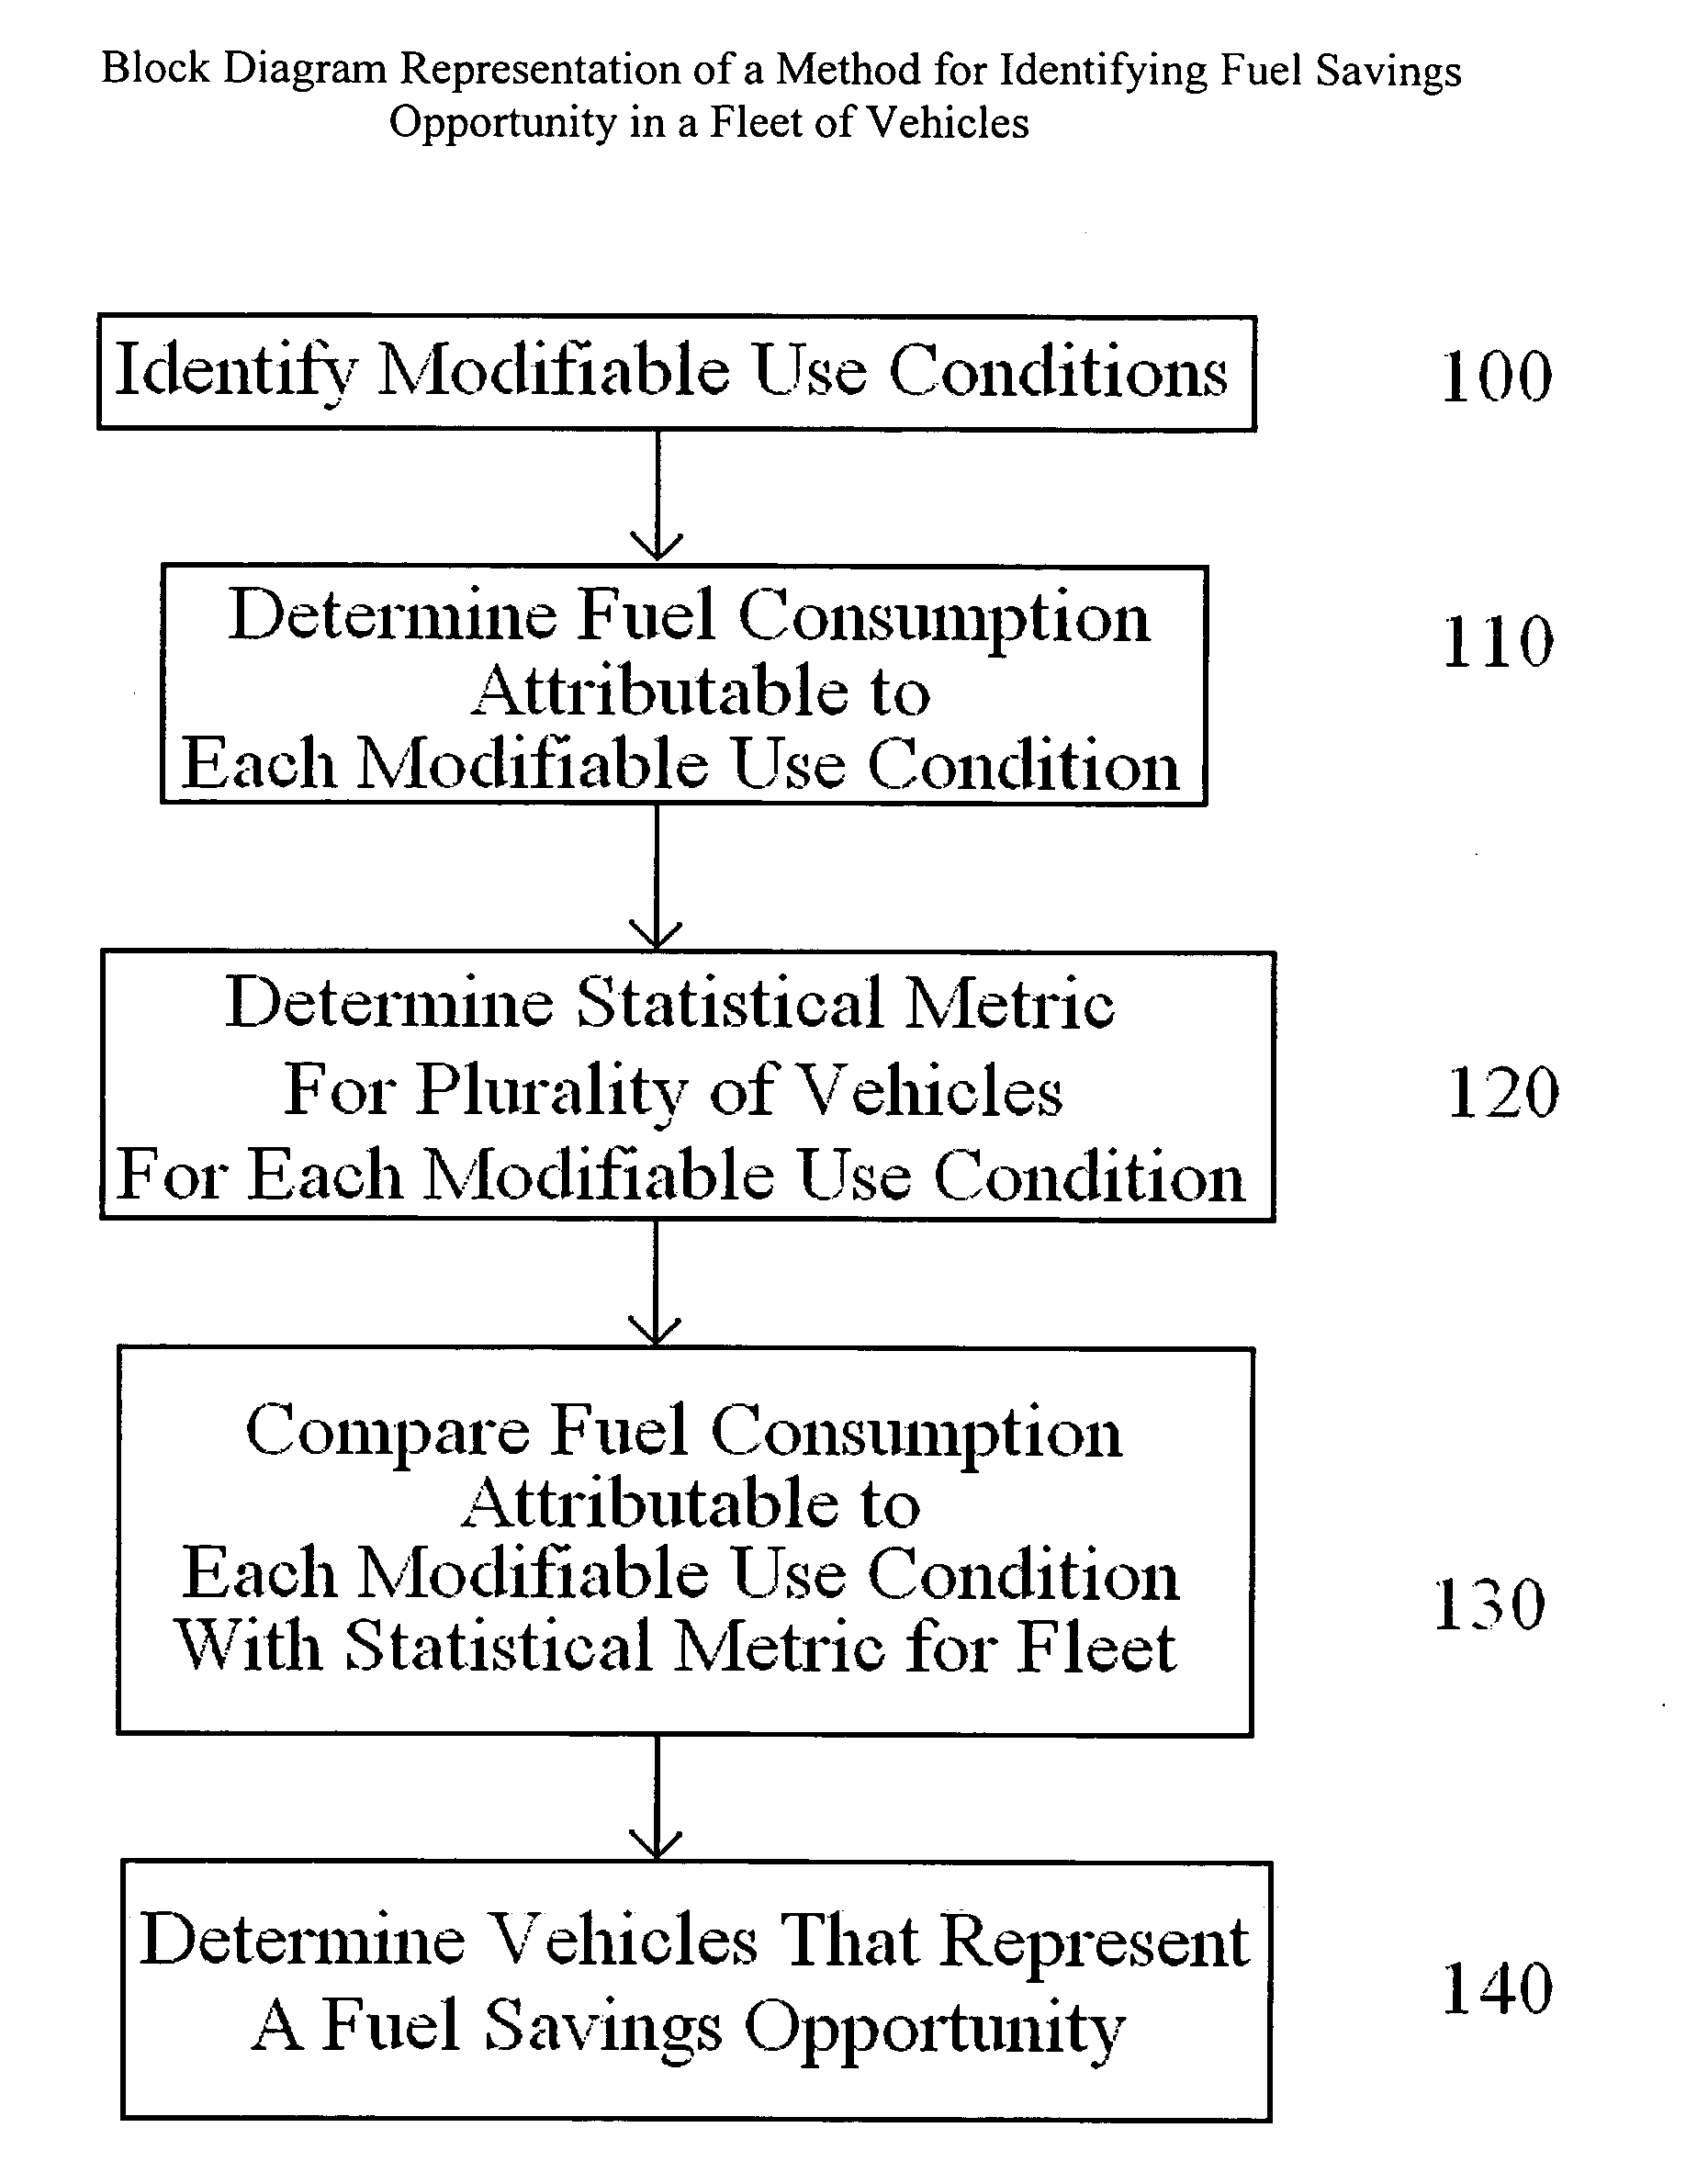 System and method for identifying fuel savings opportunity in vehicles